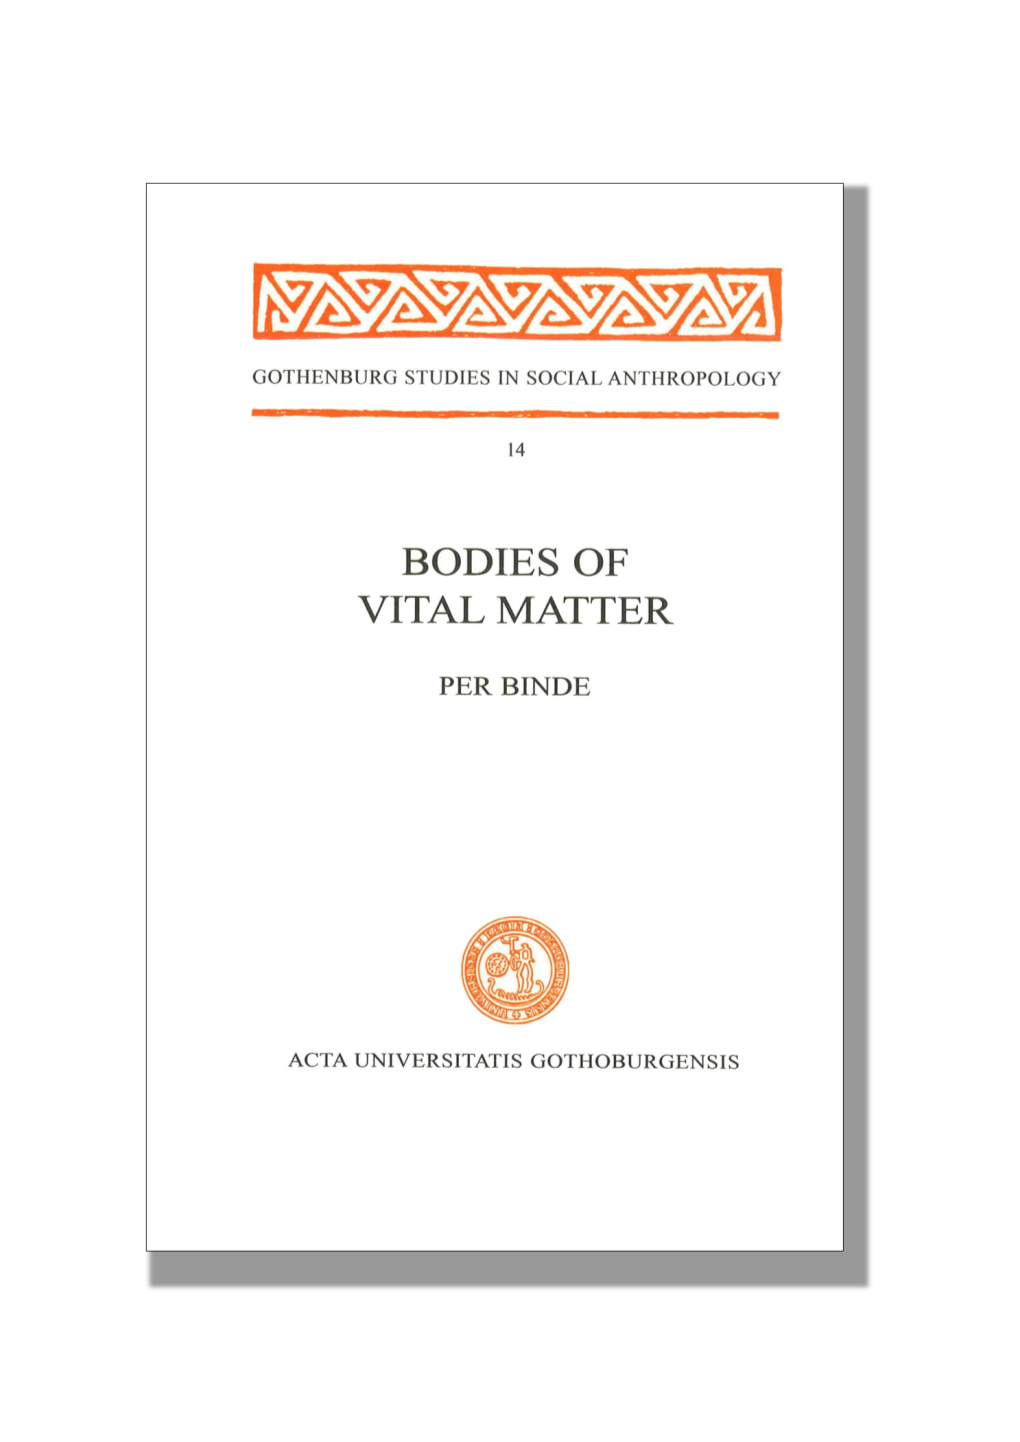 BODIES of VITAL MATTER Notions of Life Force and Transcendence in Traditional Southern Italy